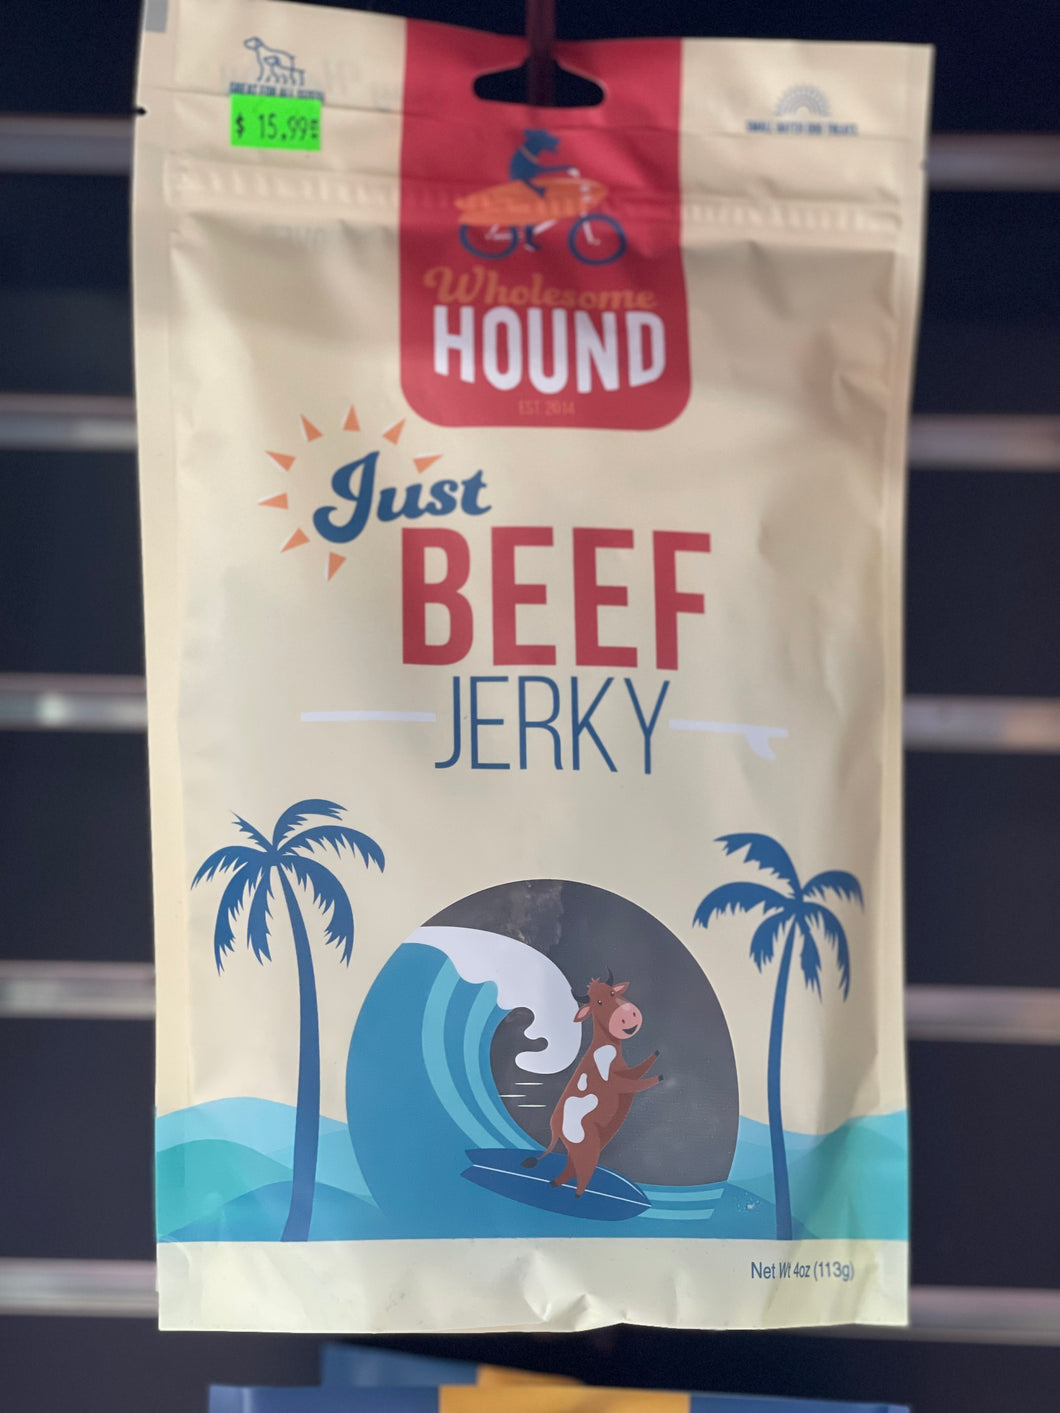 Wholesome Hound Just Beef Jerky 4oz